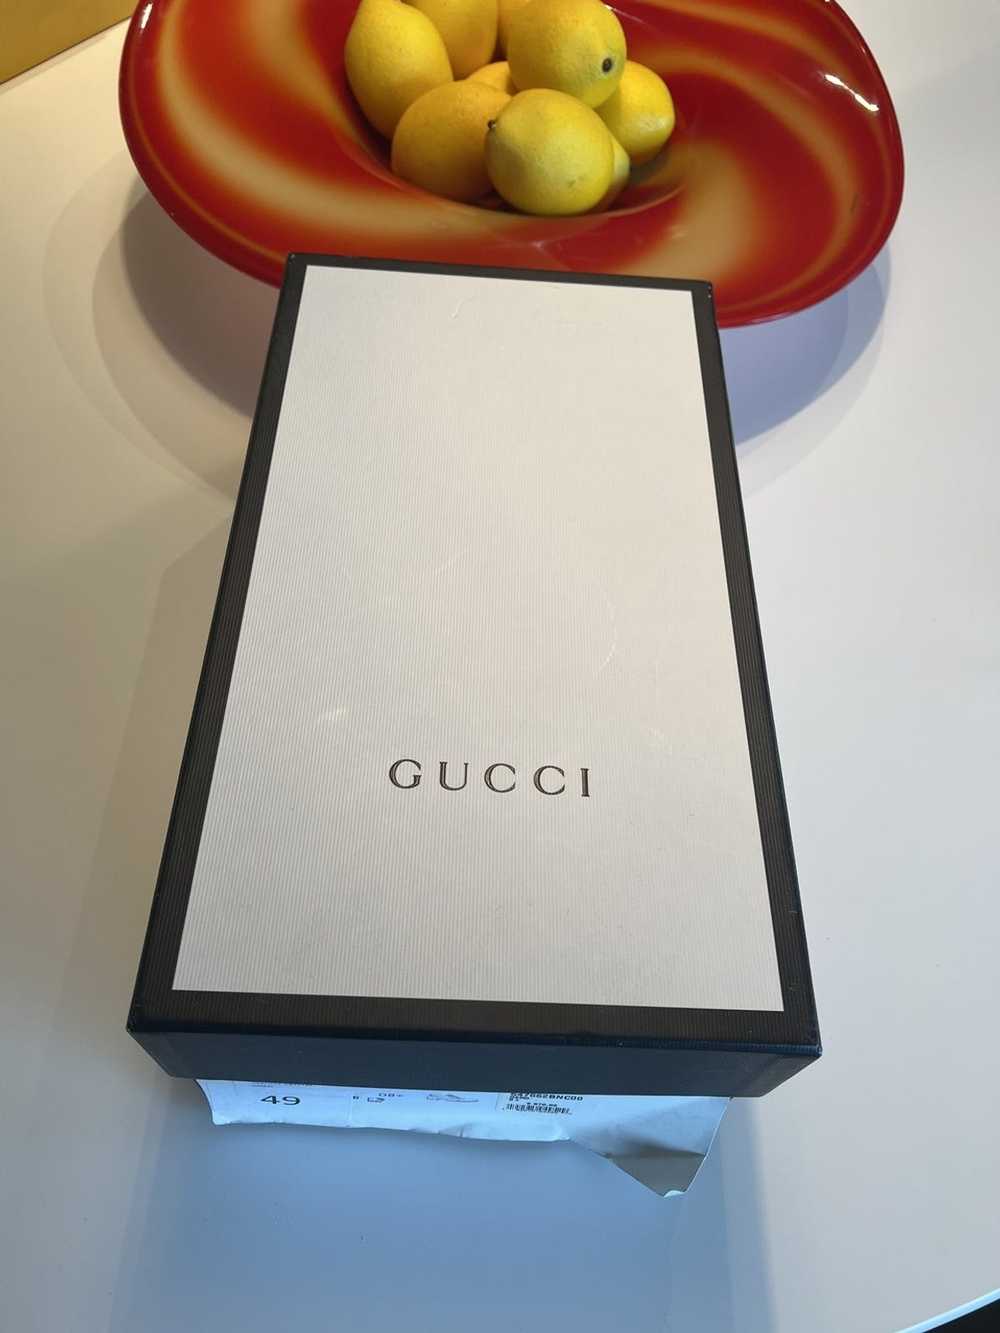 Gucci Gucci vernice Crystal black shoes - image 10